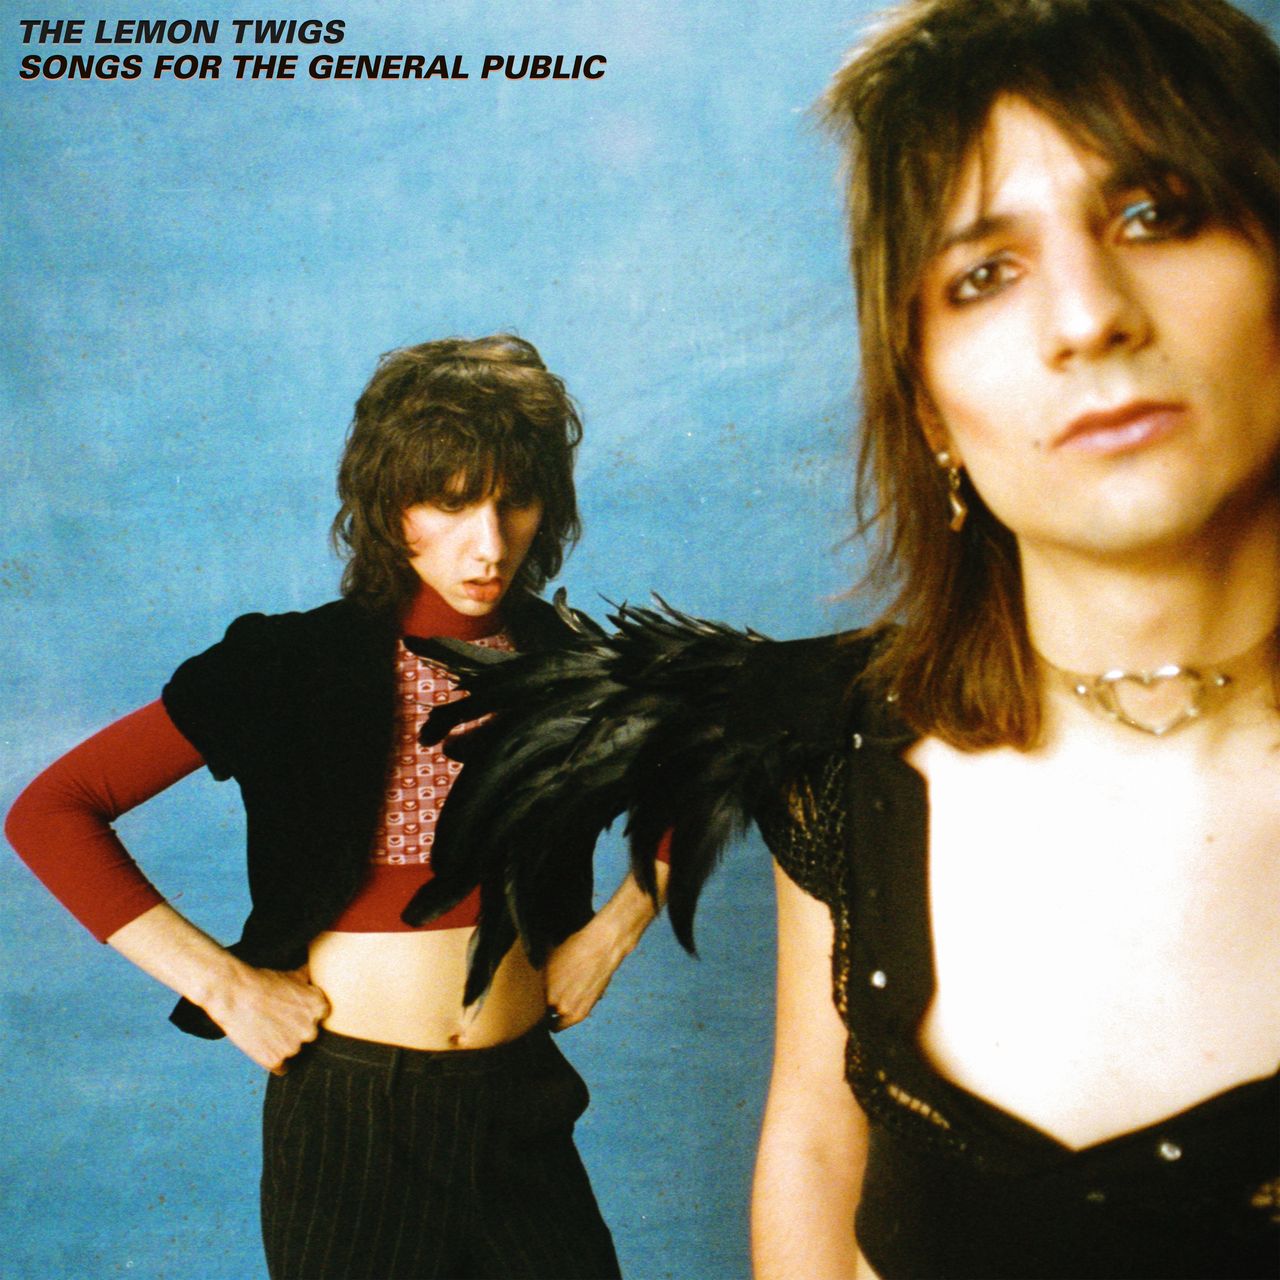 The Lemon Twigs Album Cover "Songs For The General Public"